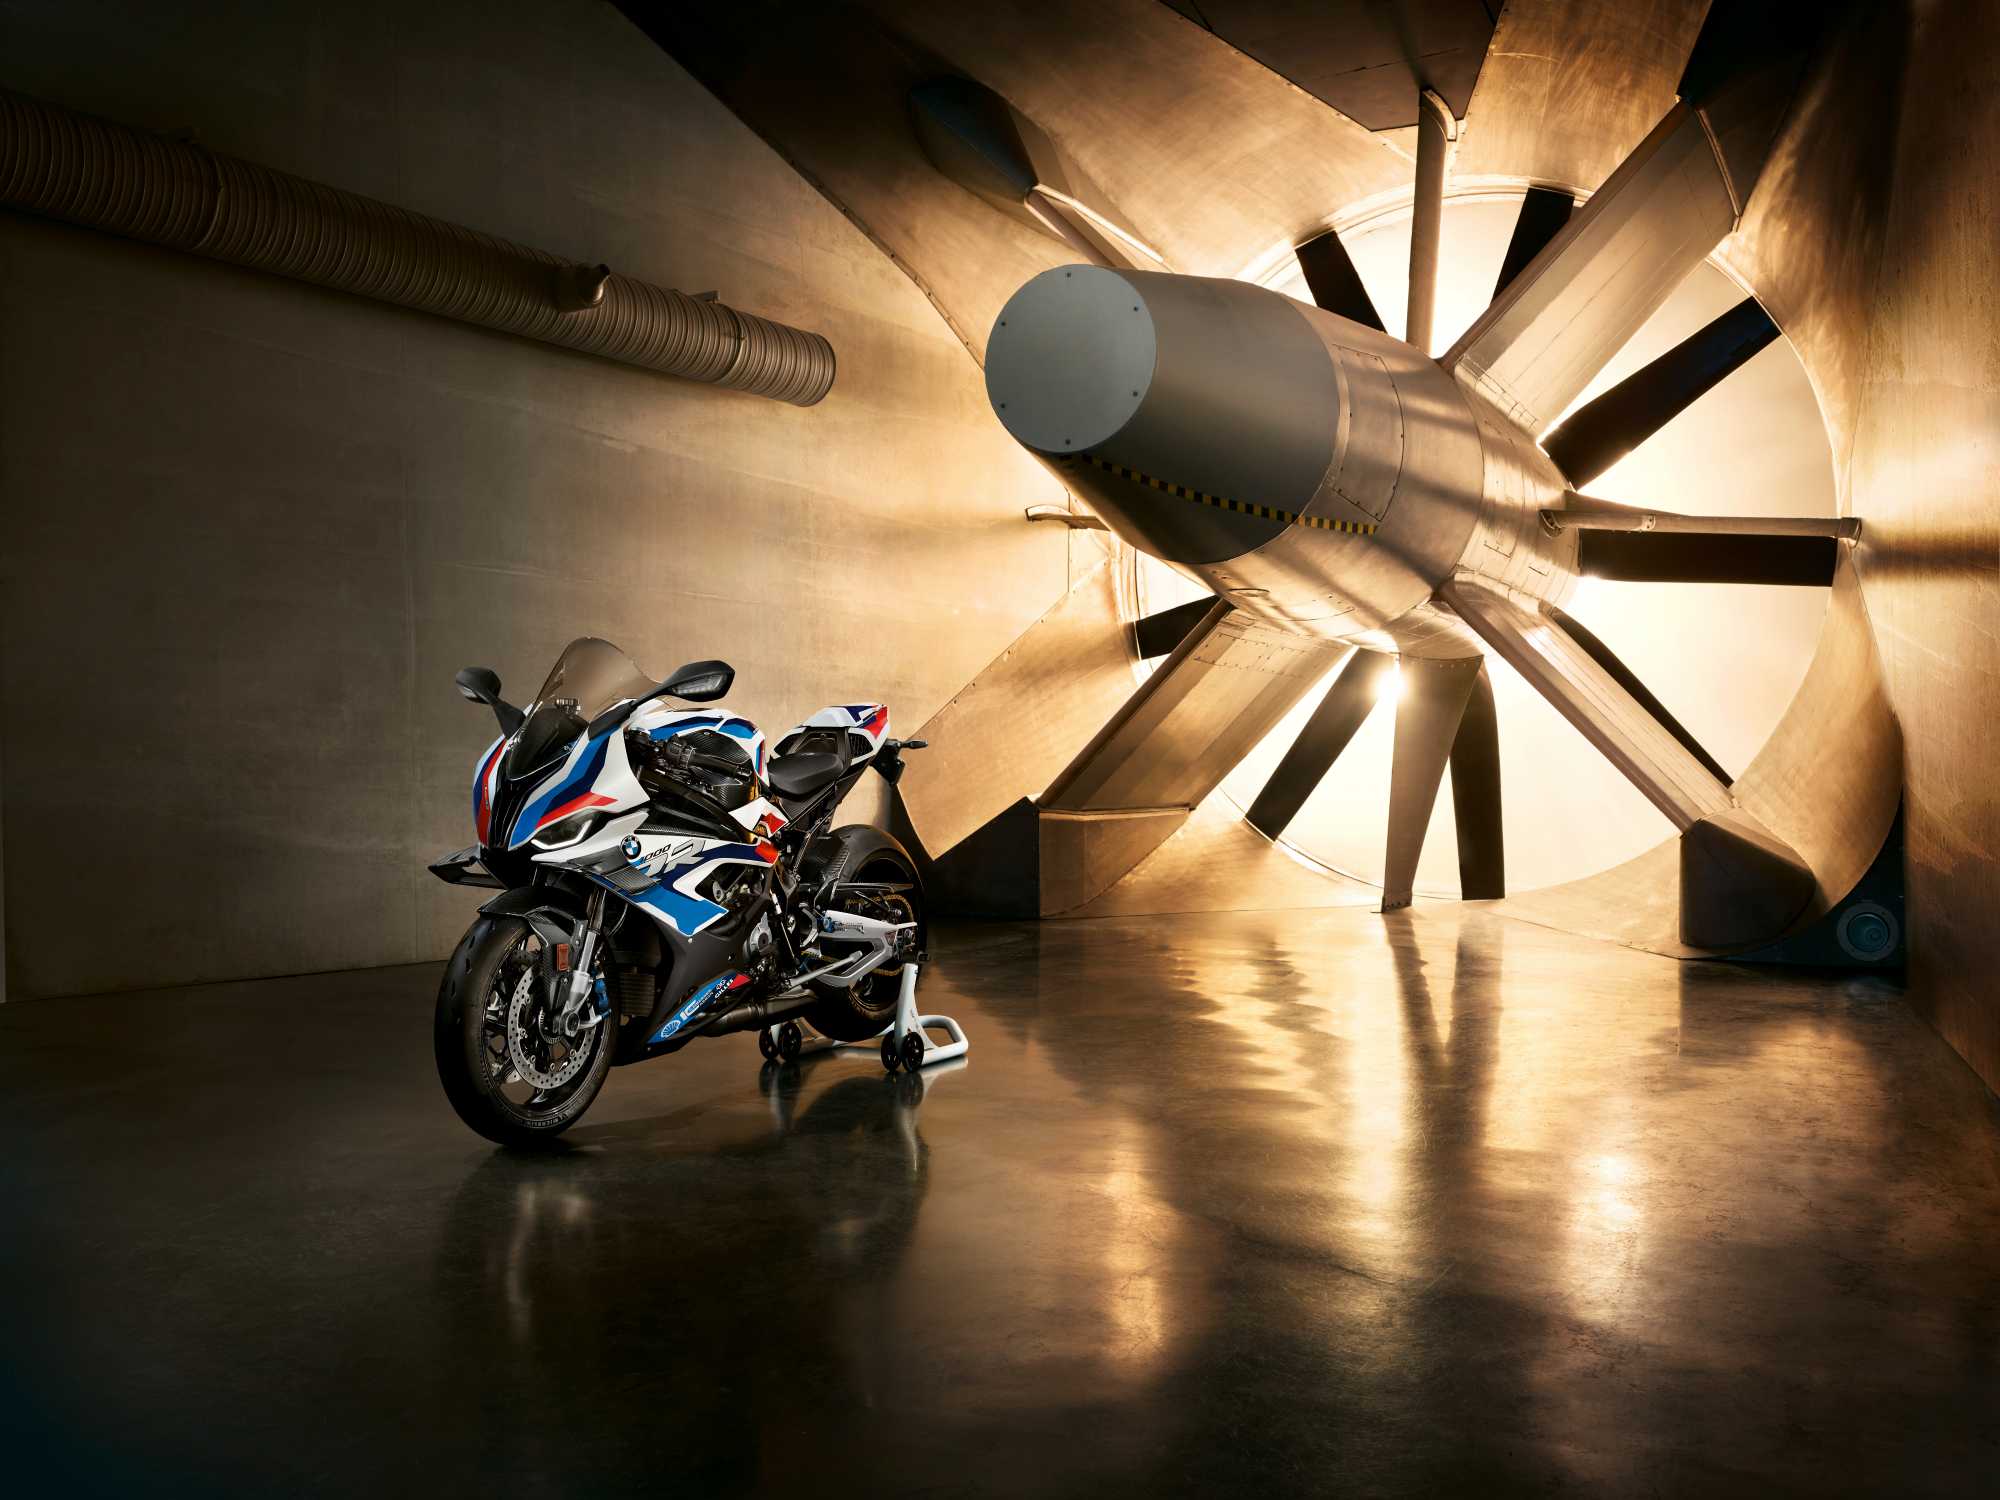 The new BMW M 1000 RR. (09/2020)